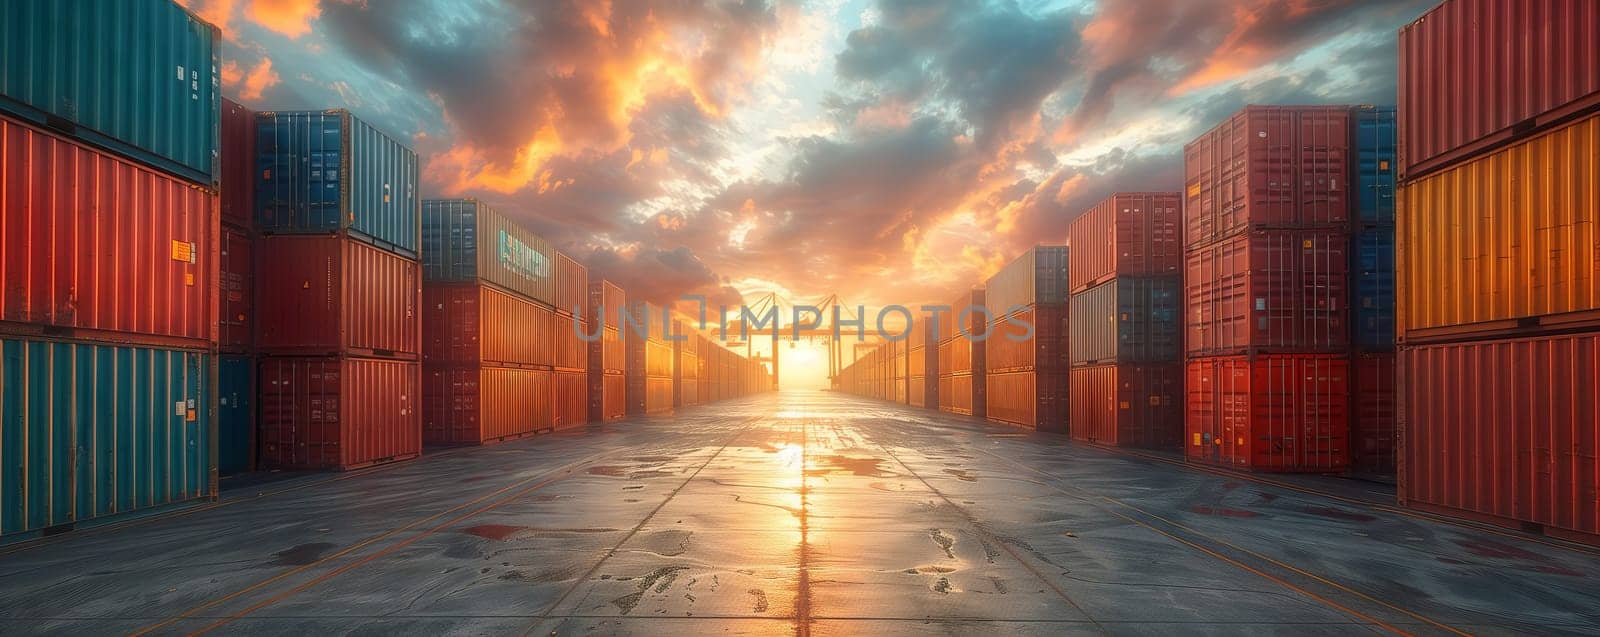 Sunlight breaks through clouds onto shipping containers in natural landscape by richwolf